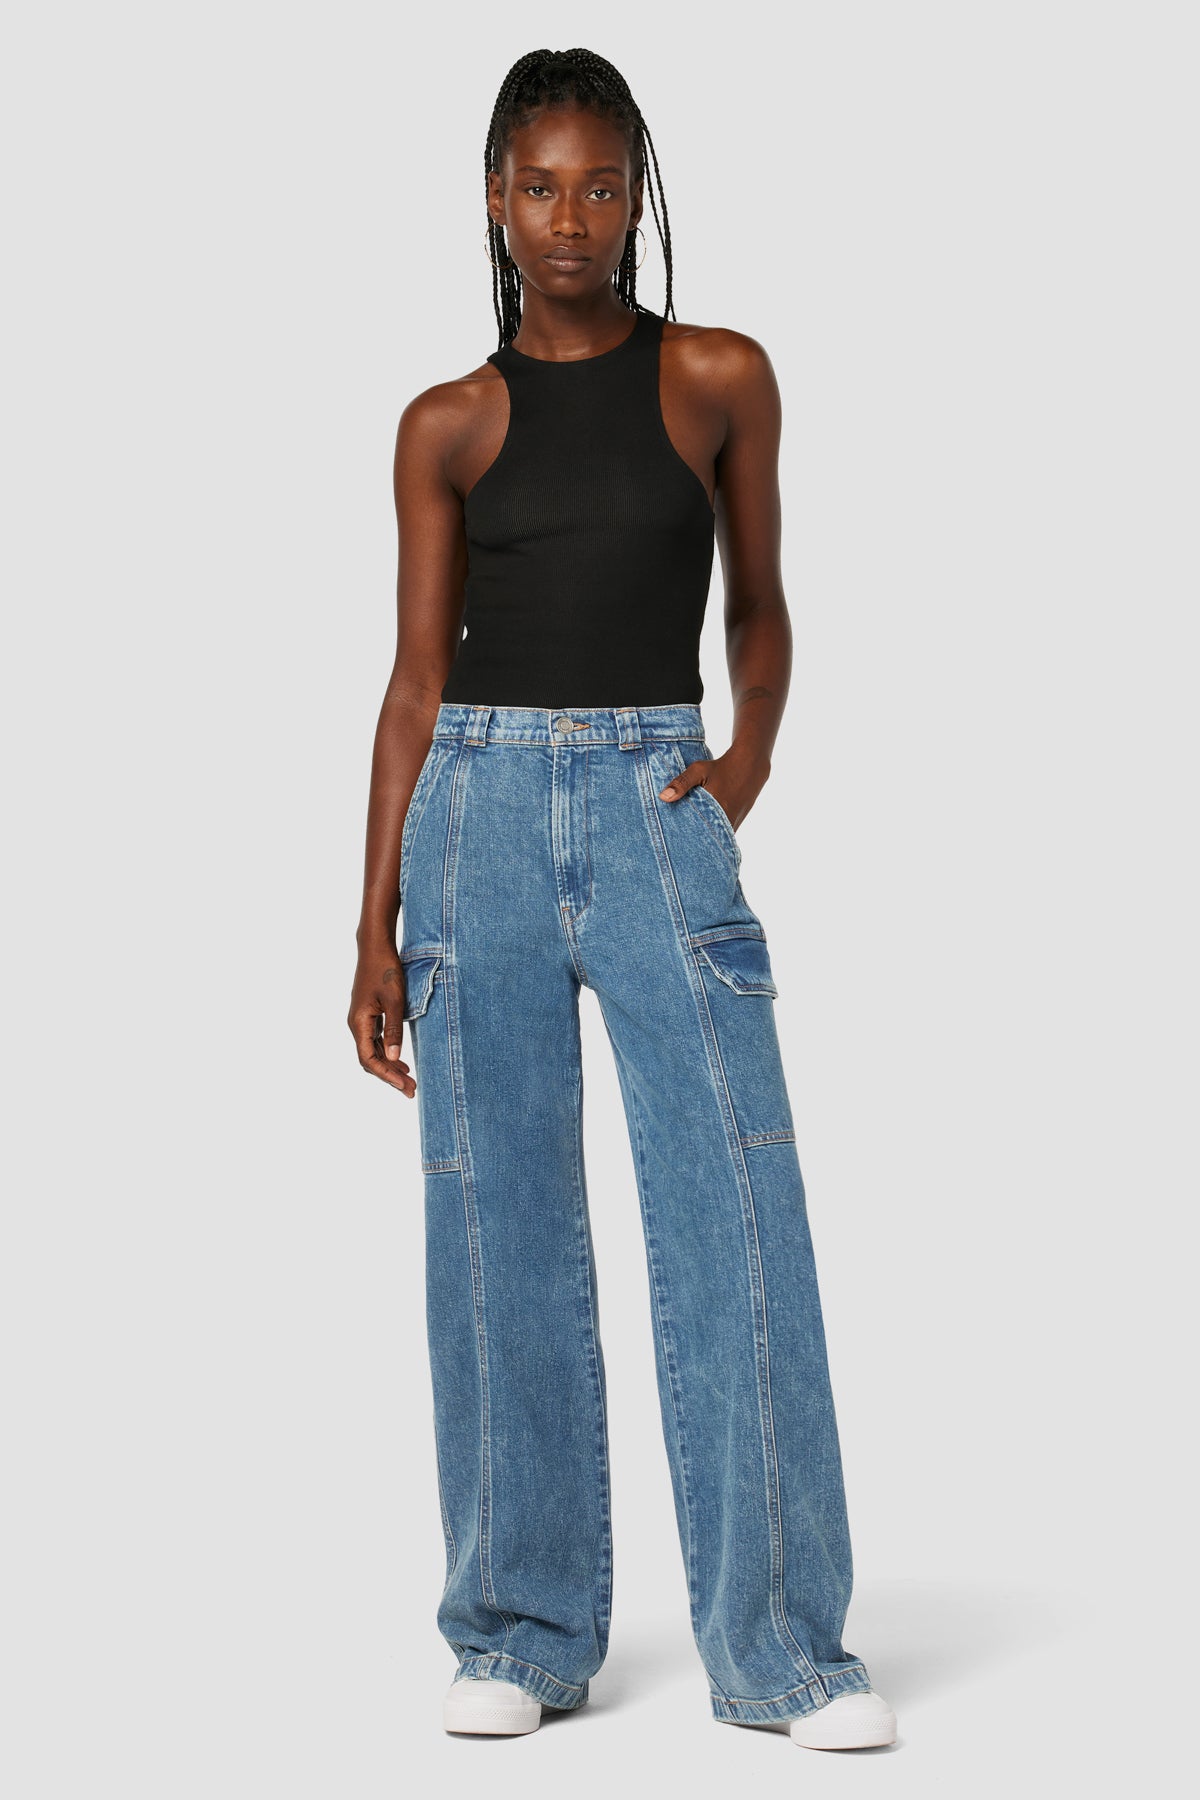 how much do hudson jeans cost